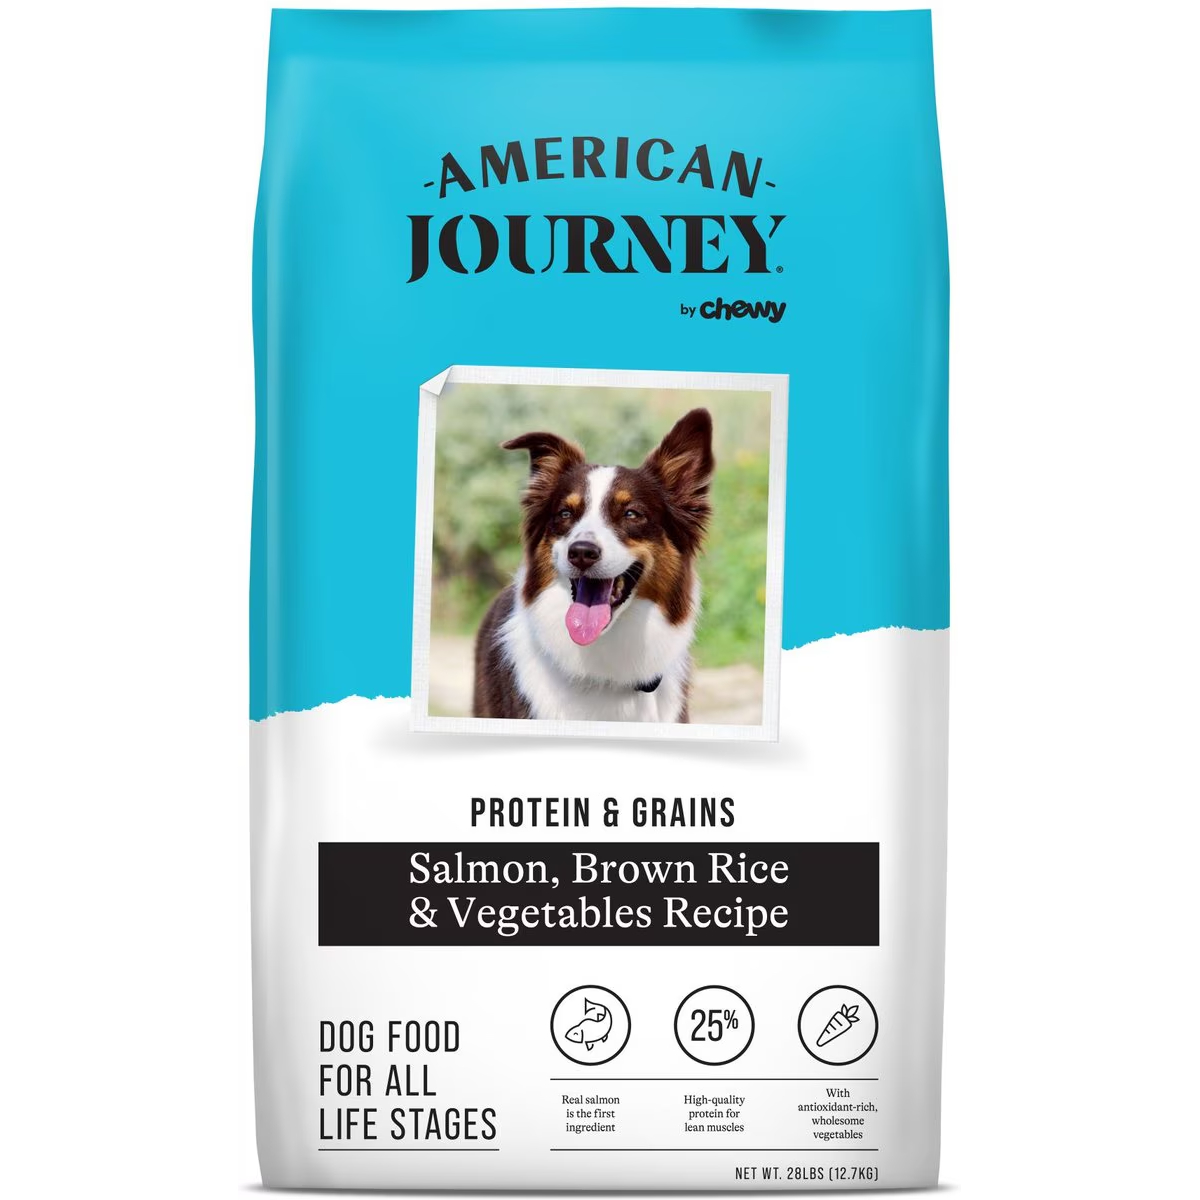 American Journey Protein & Grains Formula Salmon, Brown Rice & Vegetables Recipe Dry Dog Food